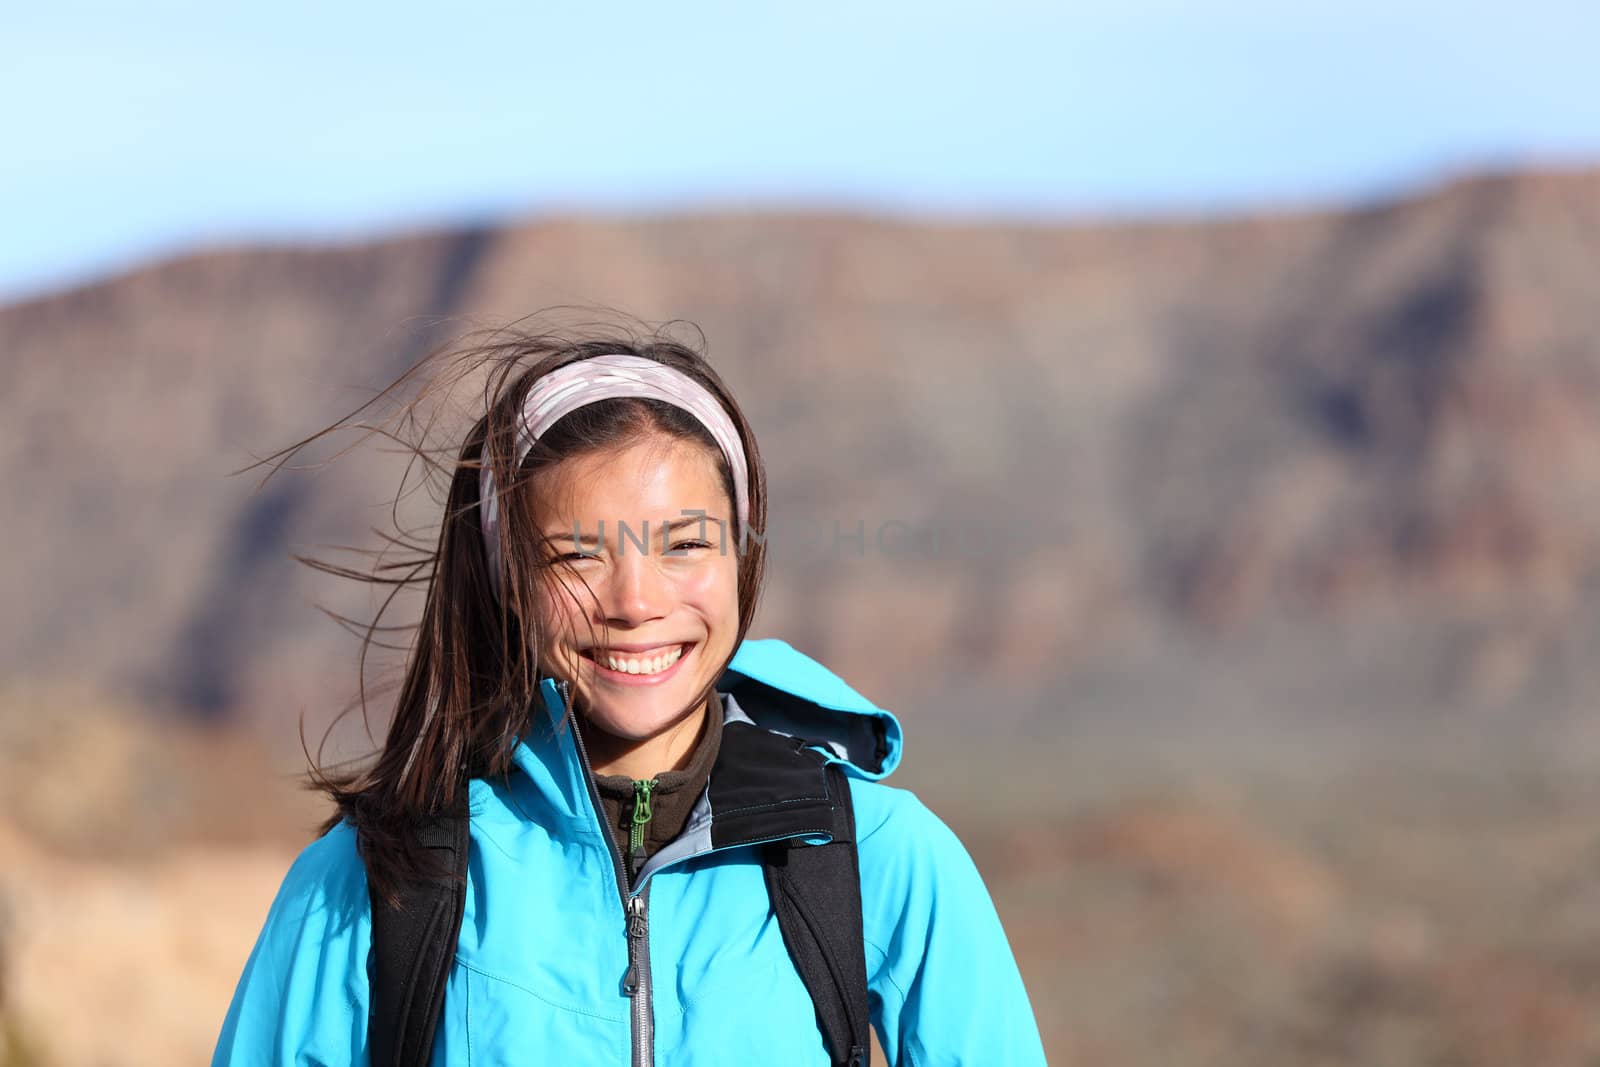 Hiker woman smiling happy during outdoors hiking. Very fresh sporty Asian Caucasian female model. Photo from Teide, Tenerife.